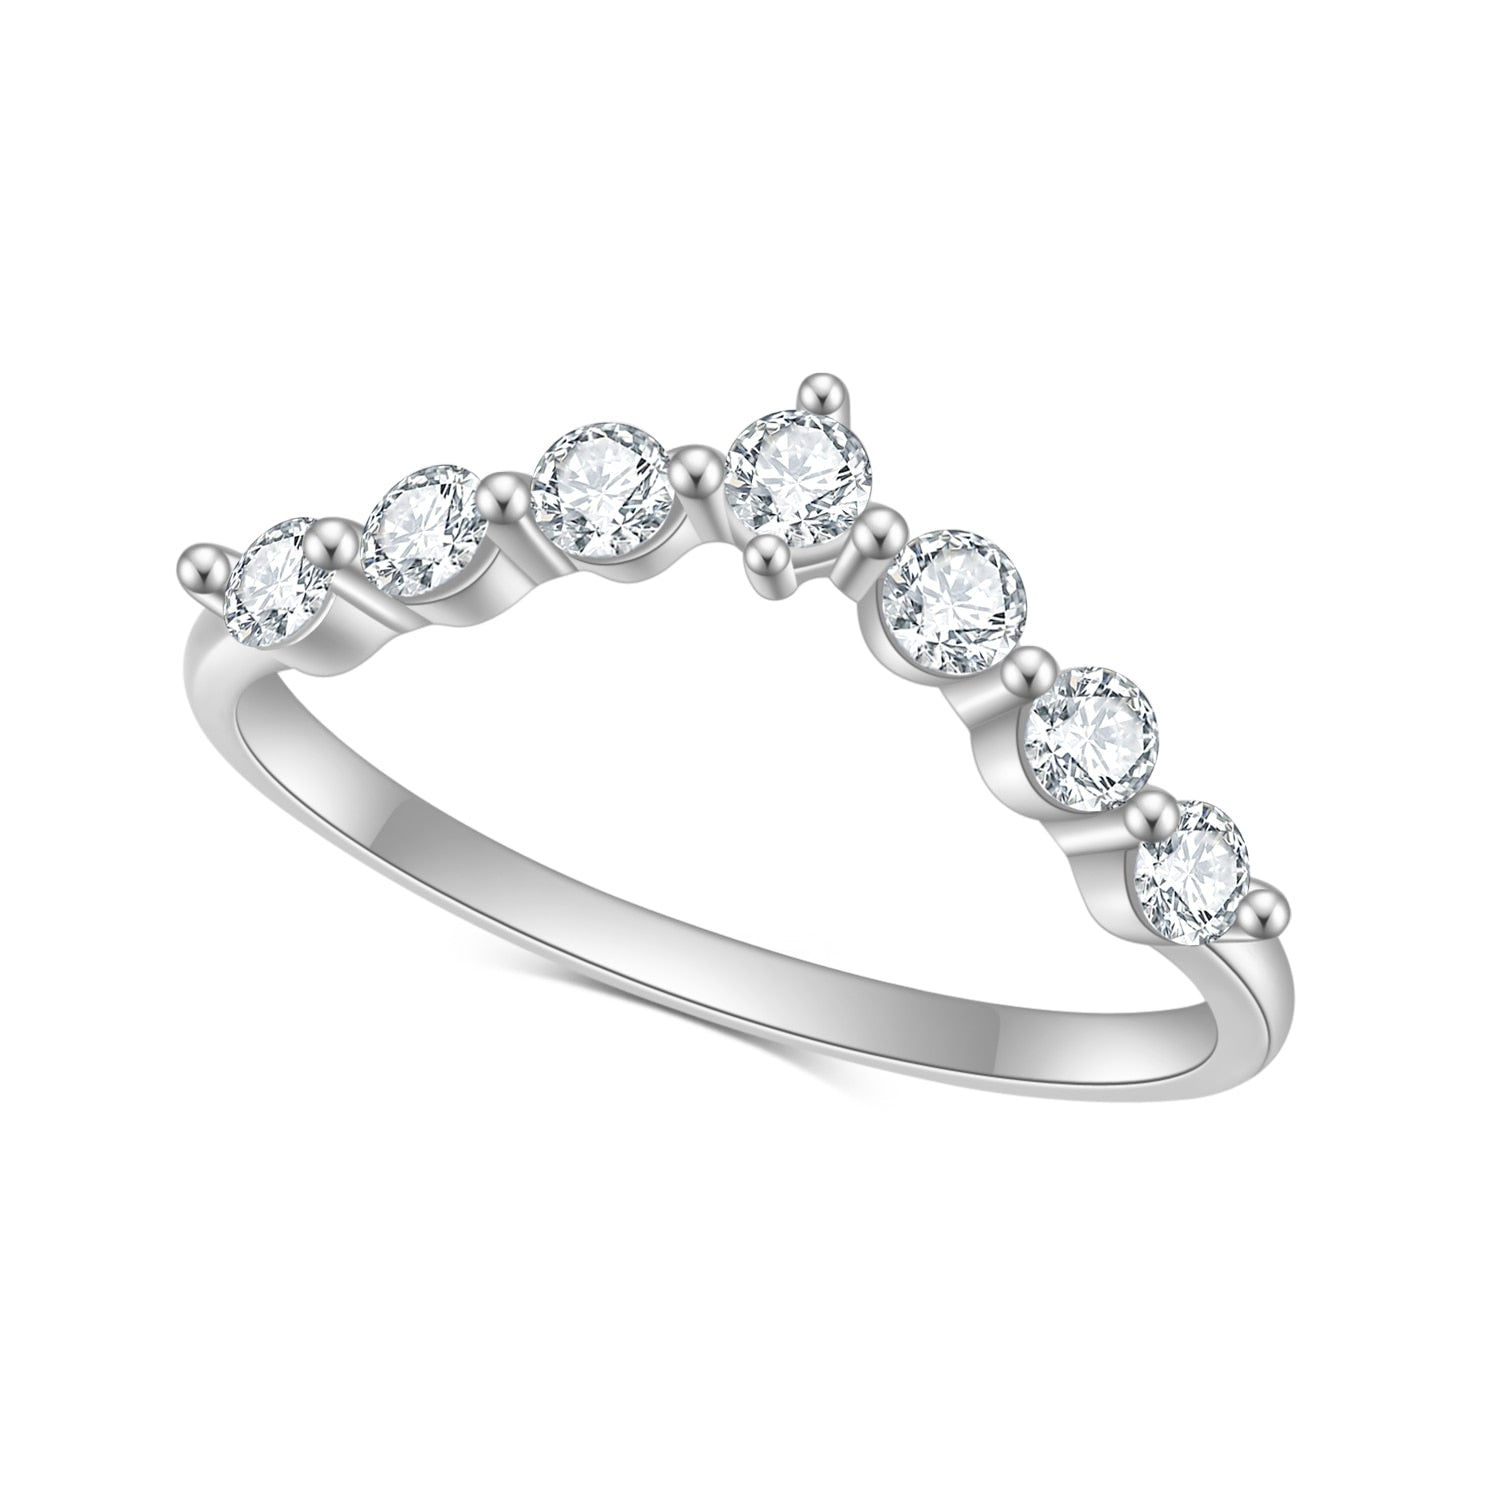 A silver chevron style wedding ring set with 7 round small moissanites.